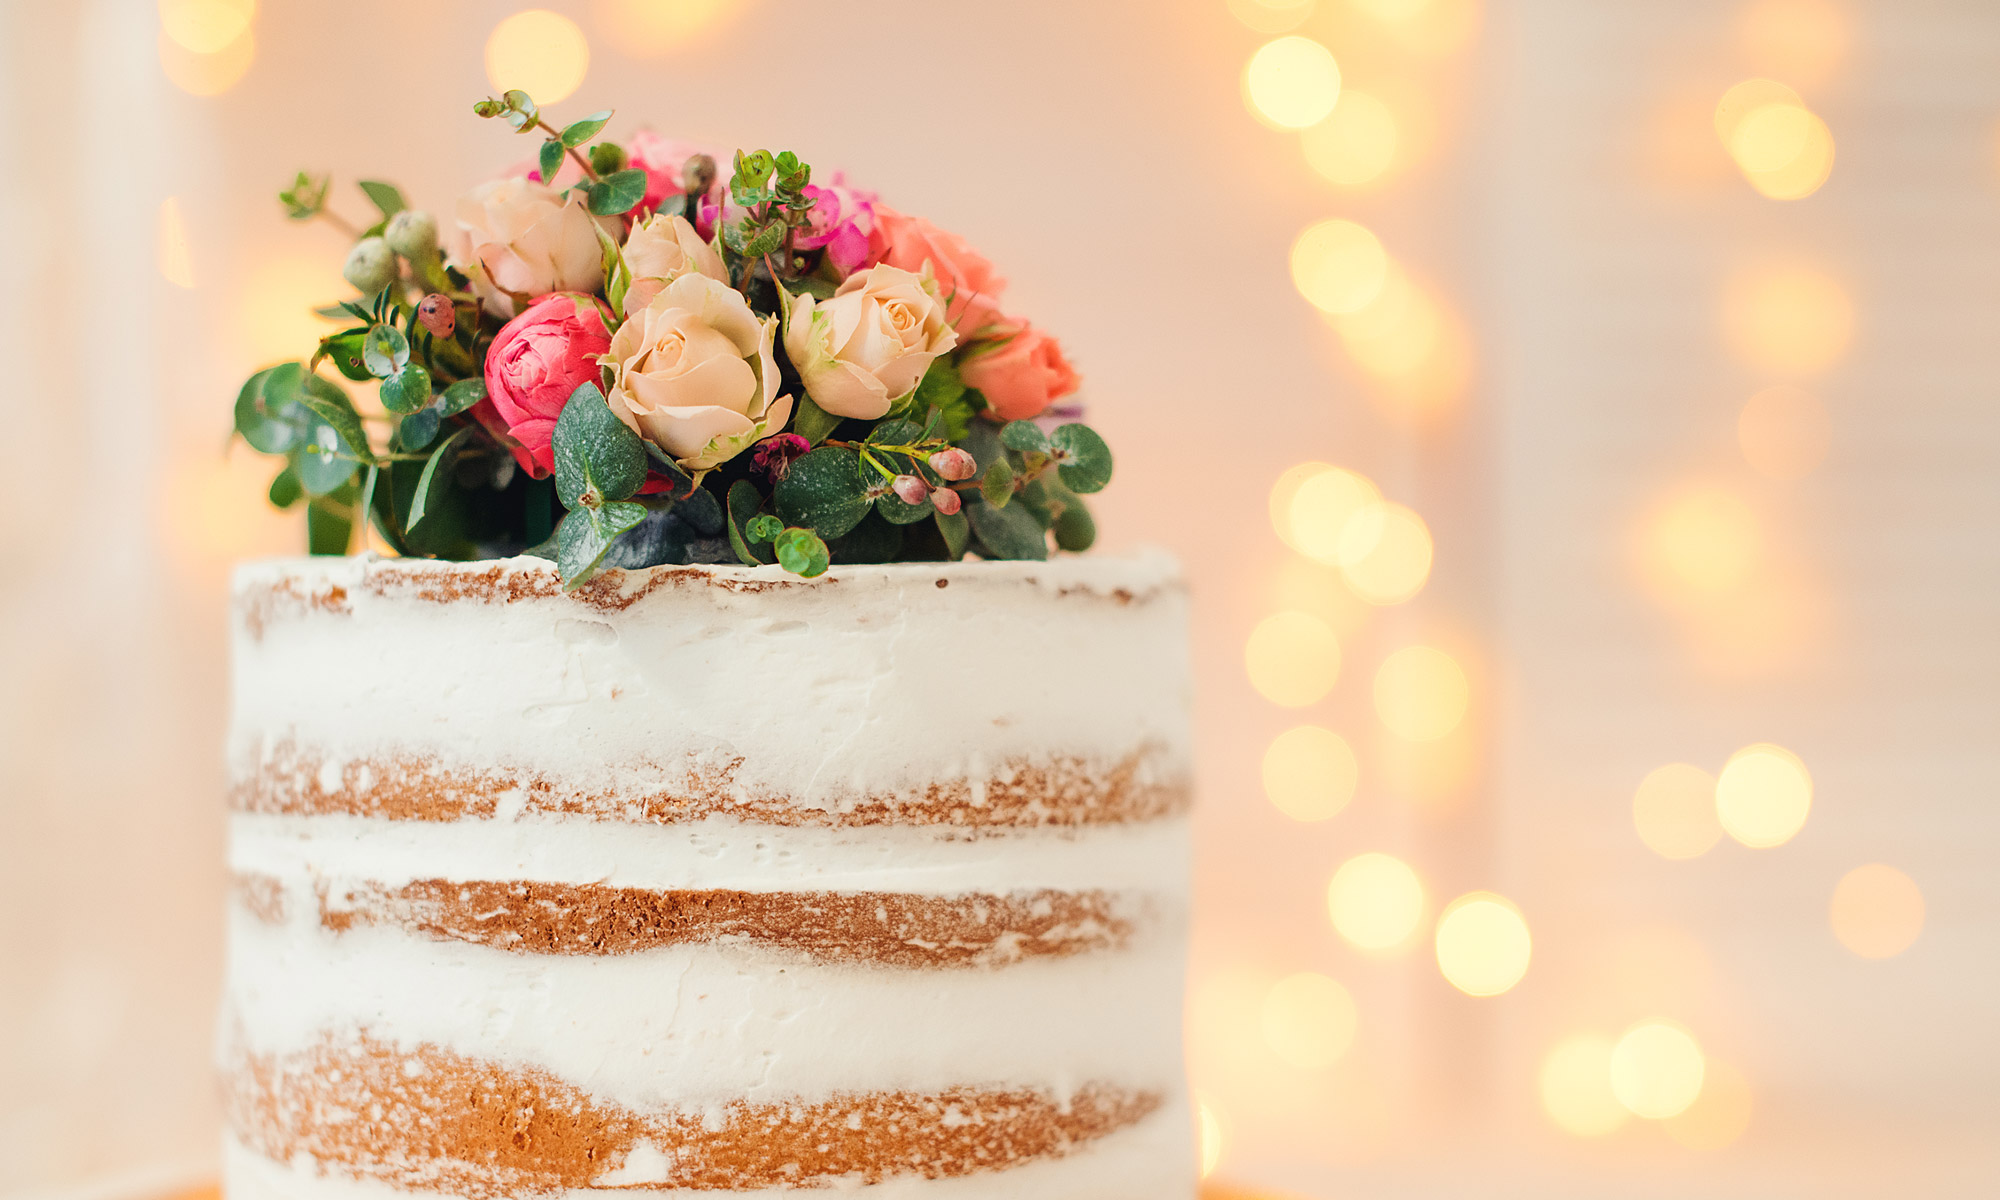 Baking Bliss One Wedding Cake at a Time